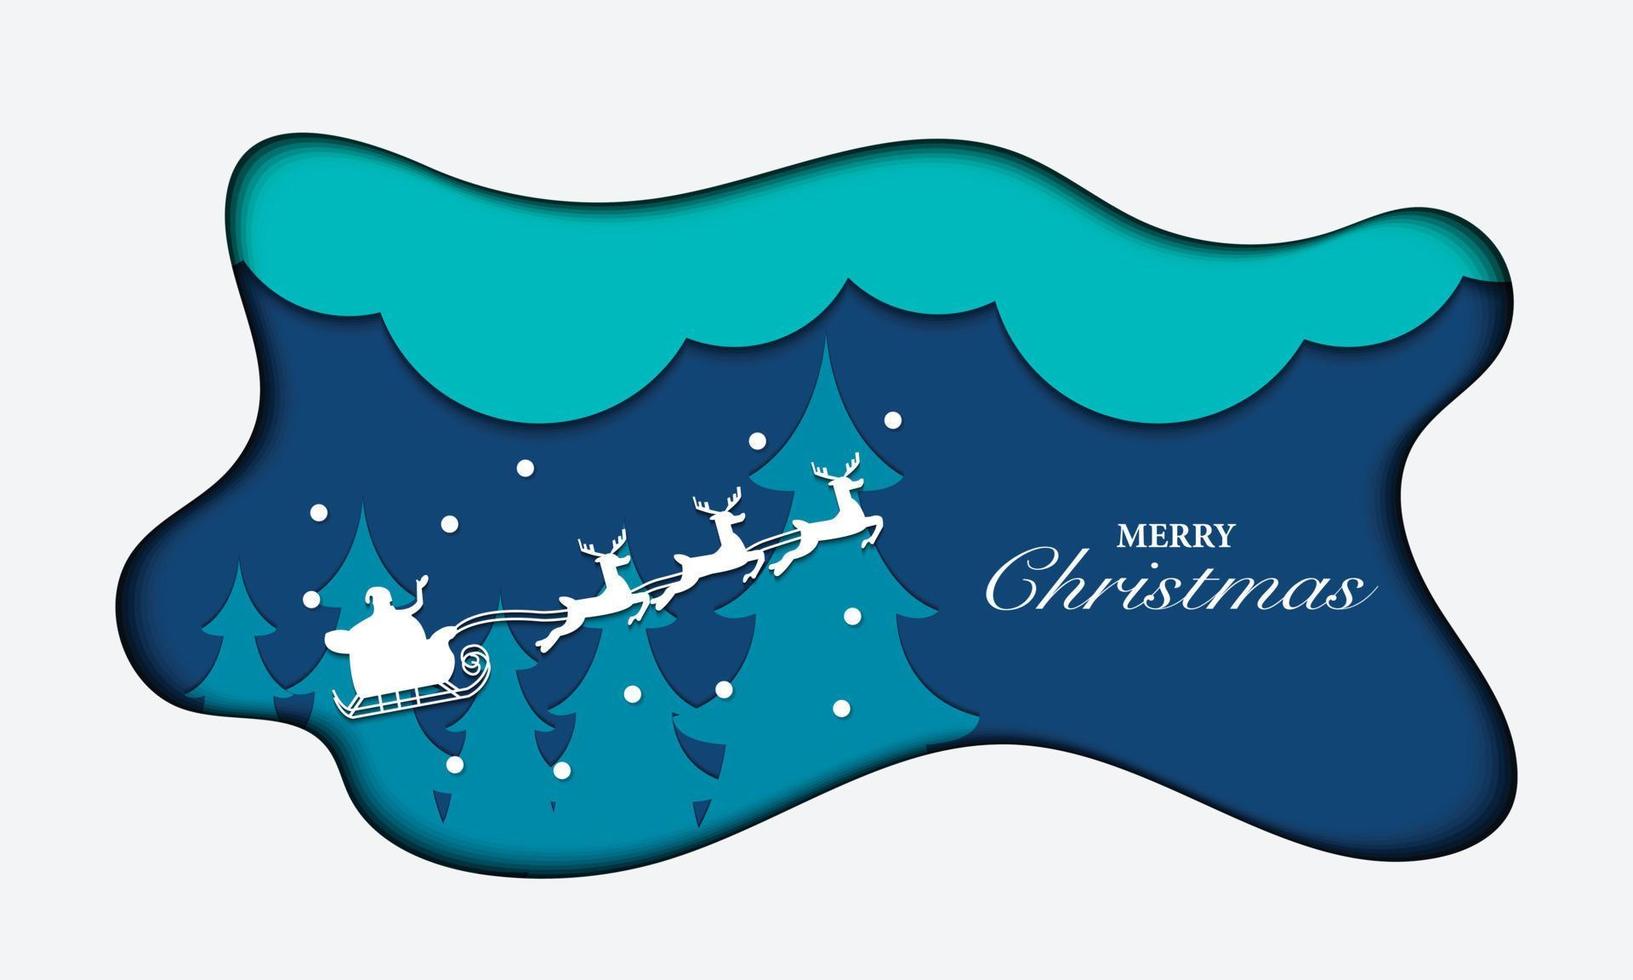 Merry Christmas Paper Style Vector